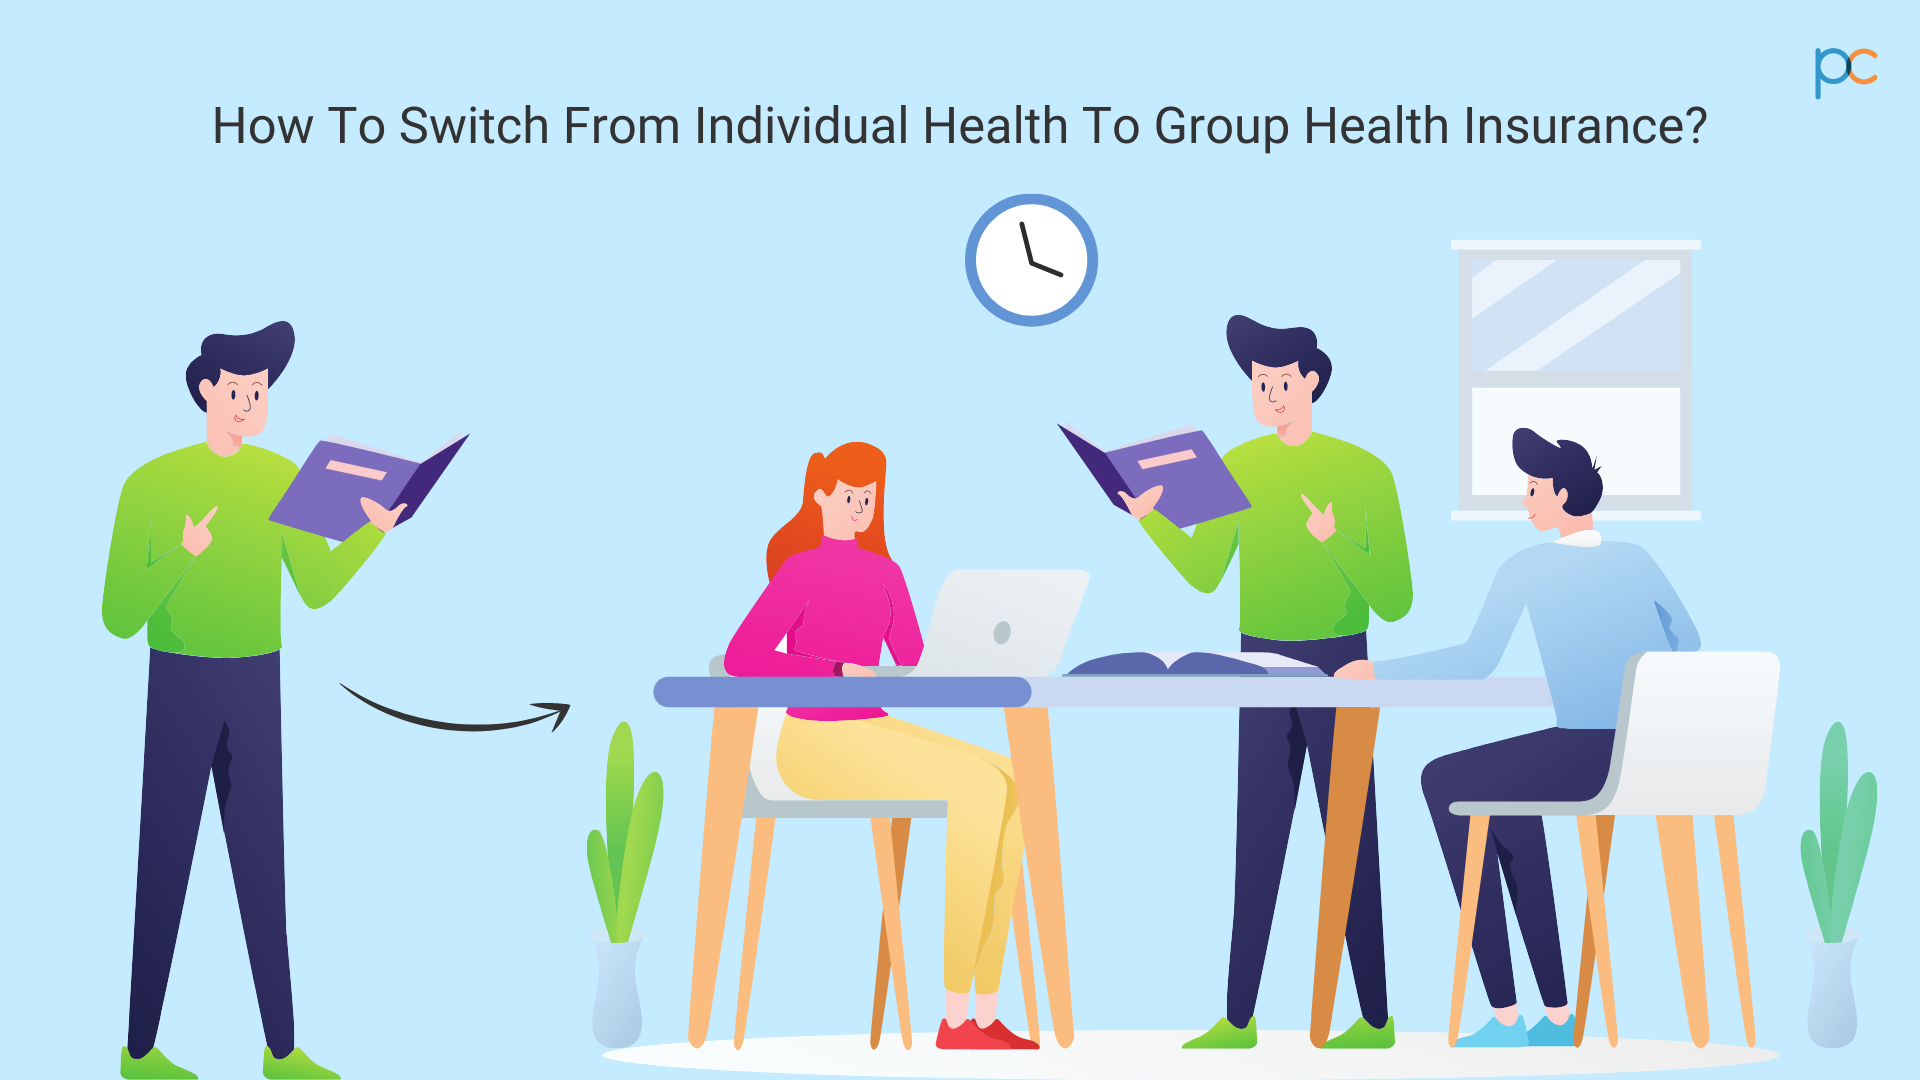 How To Switch From Individual Health To Group Health Insurance